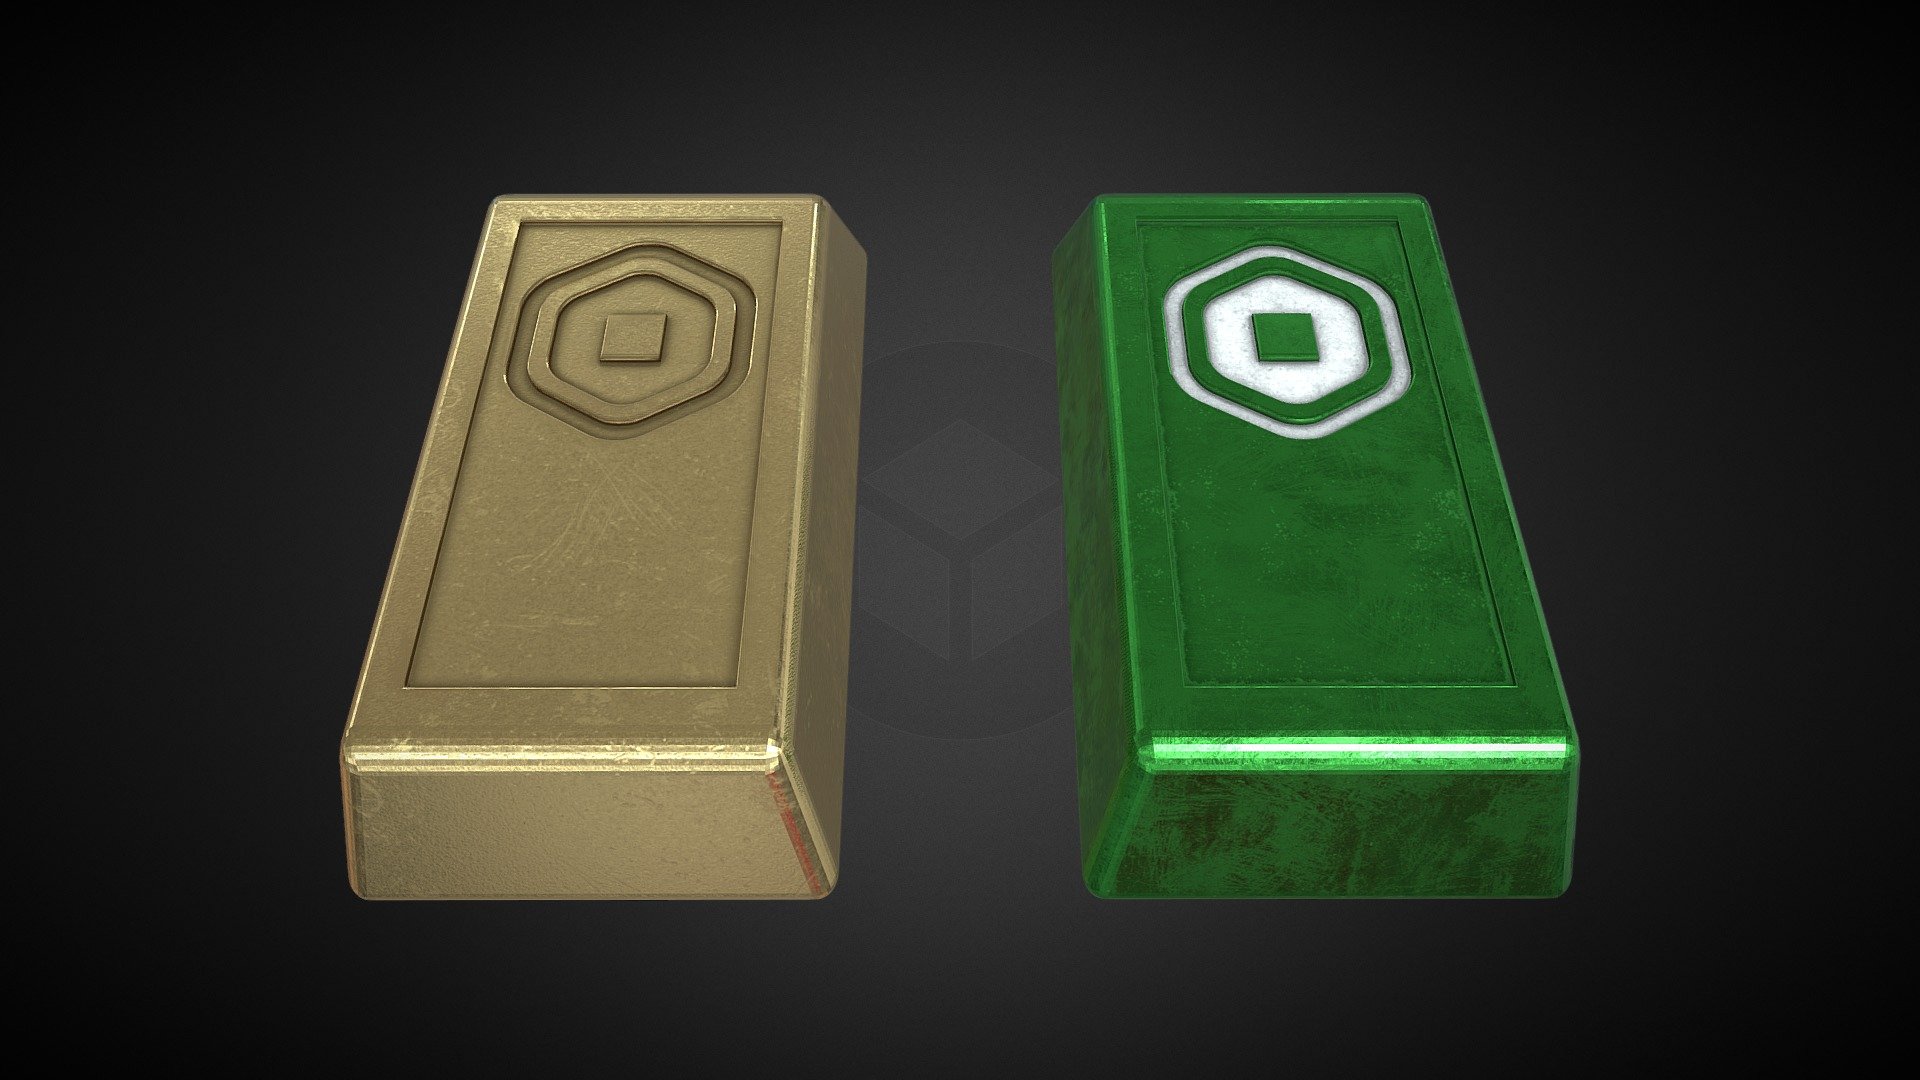 I made gold and green+white colored ingots for robux.

This model contains 2 objects with 5 textures each.


Base color
Normals
Height
Roughness
Metallic

The textures are already embedded 3d model